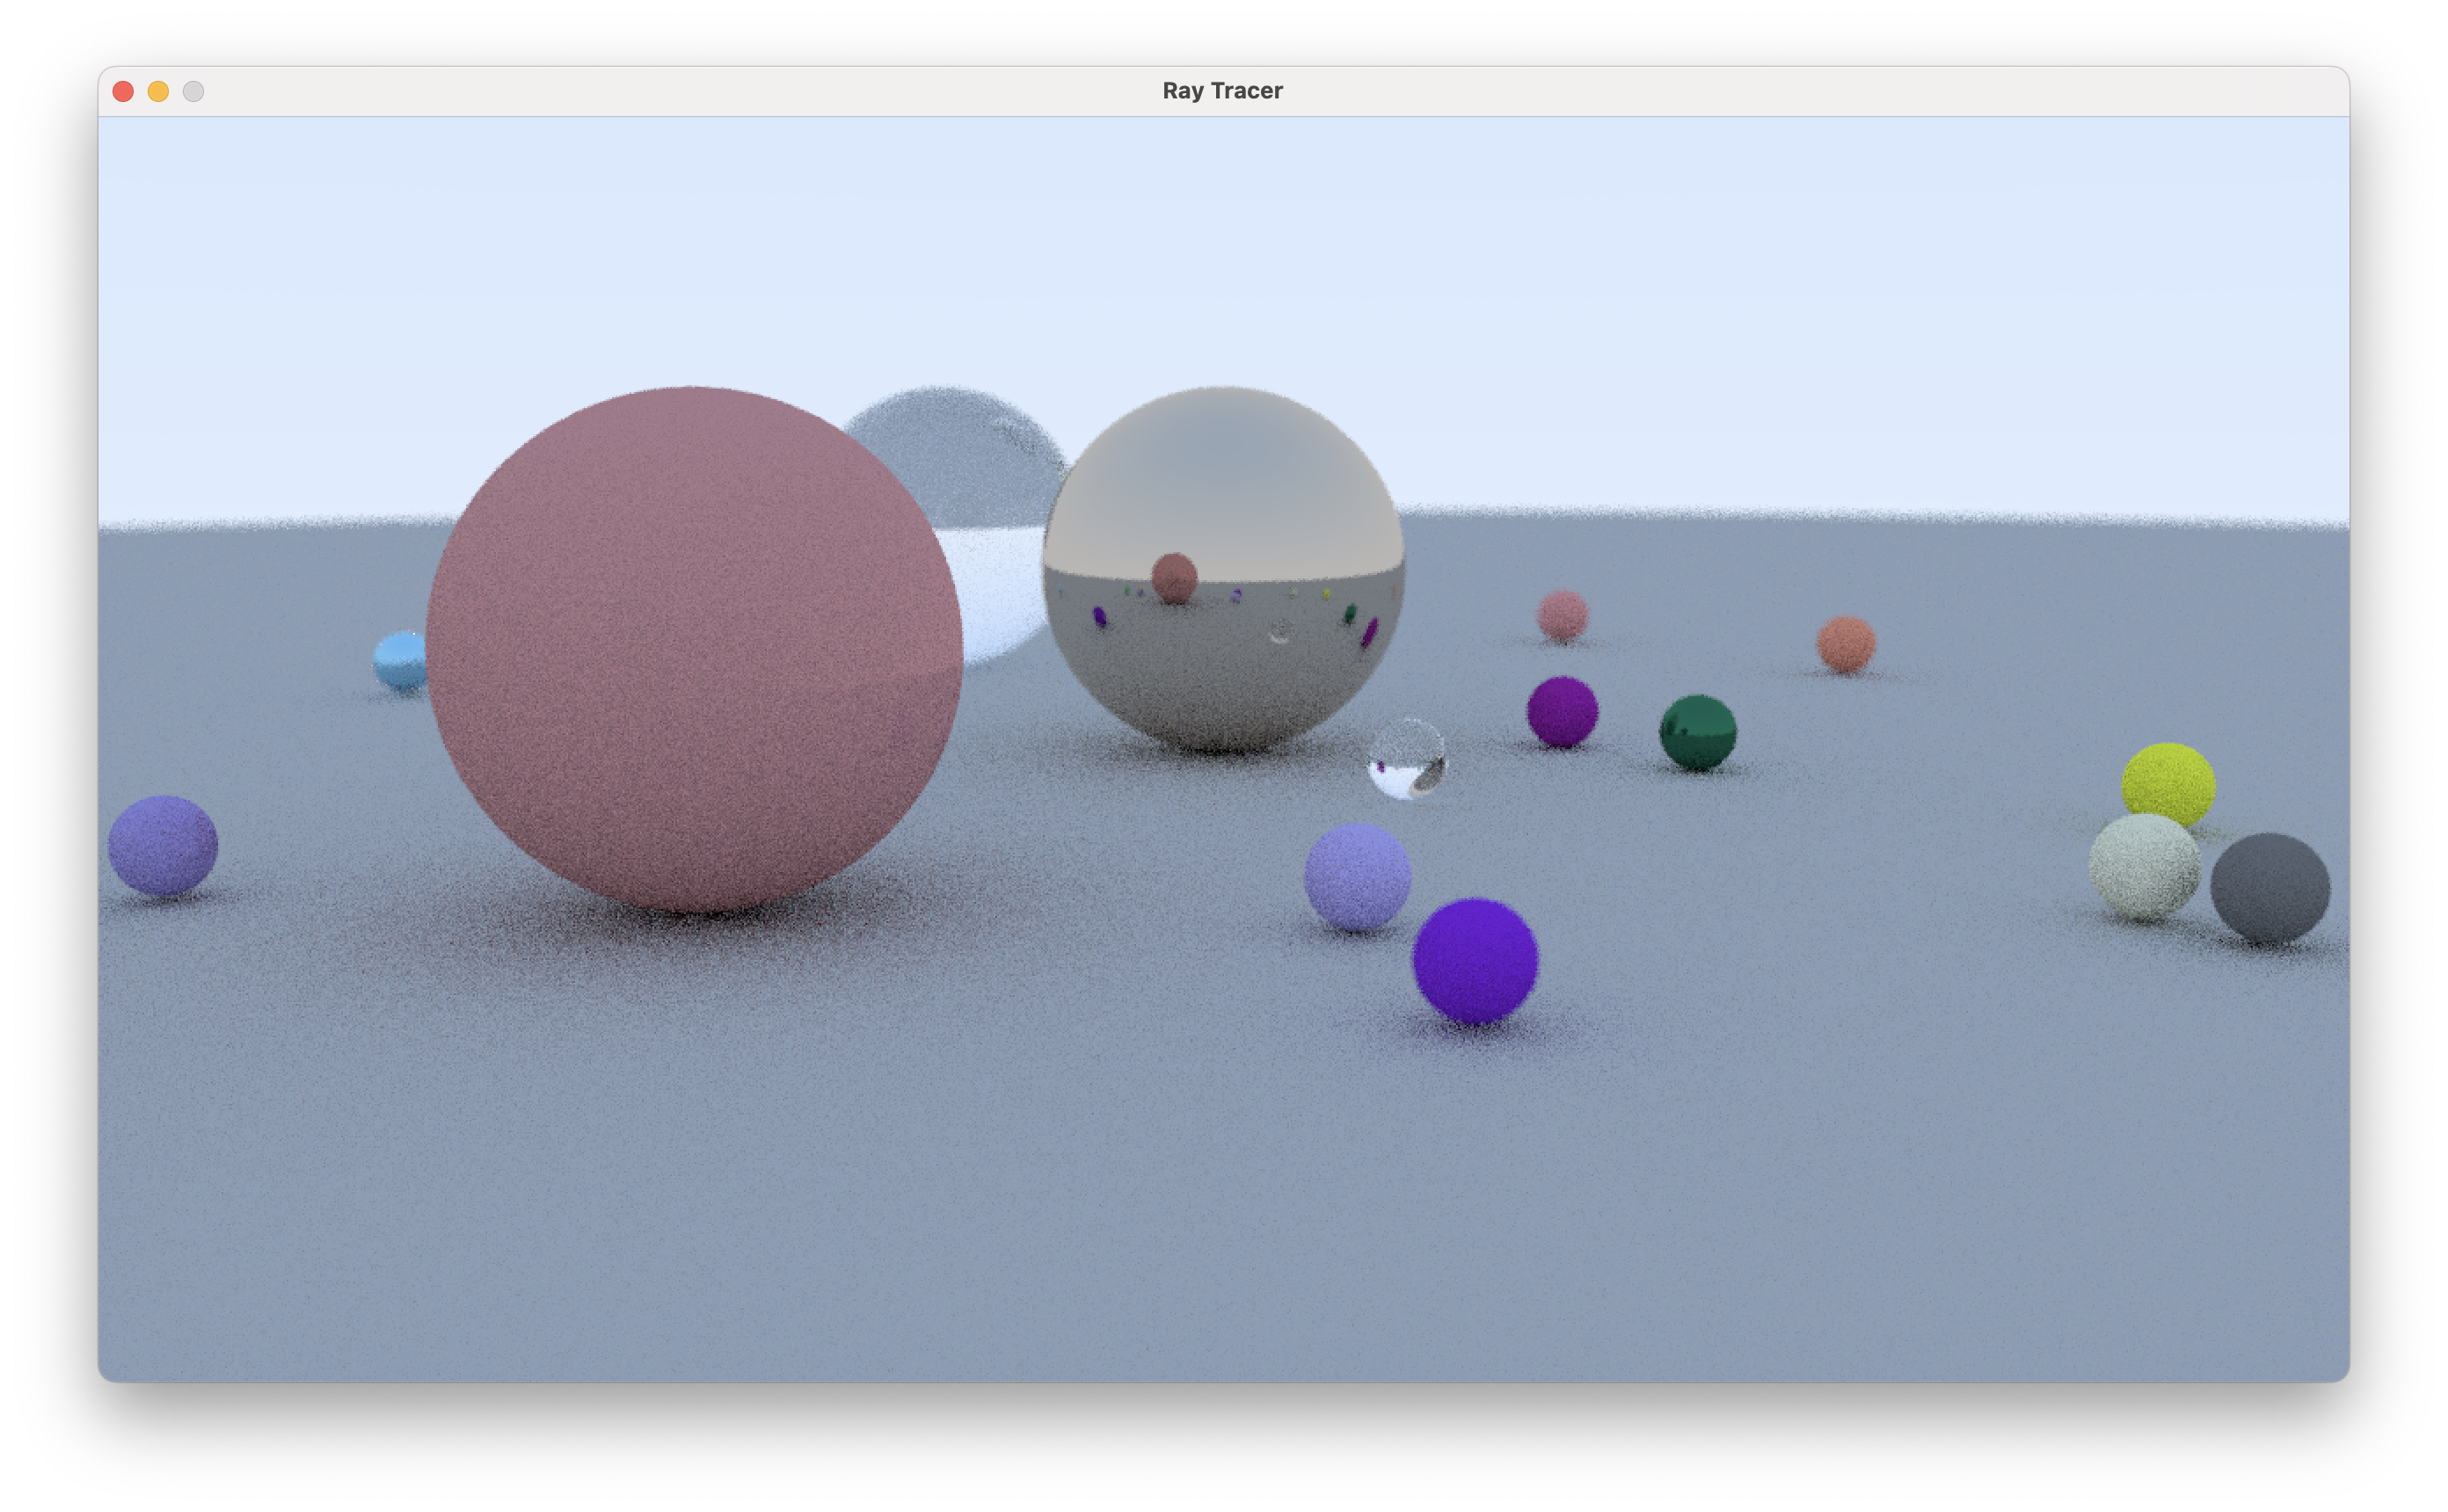 Real Time Ray Tracer